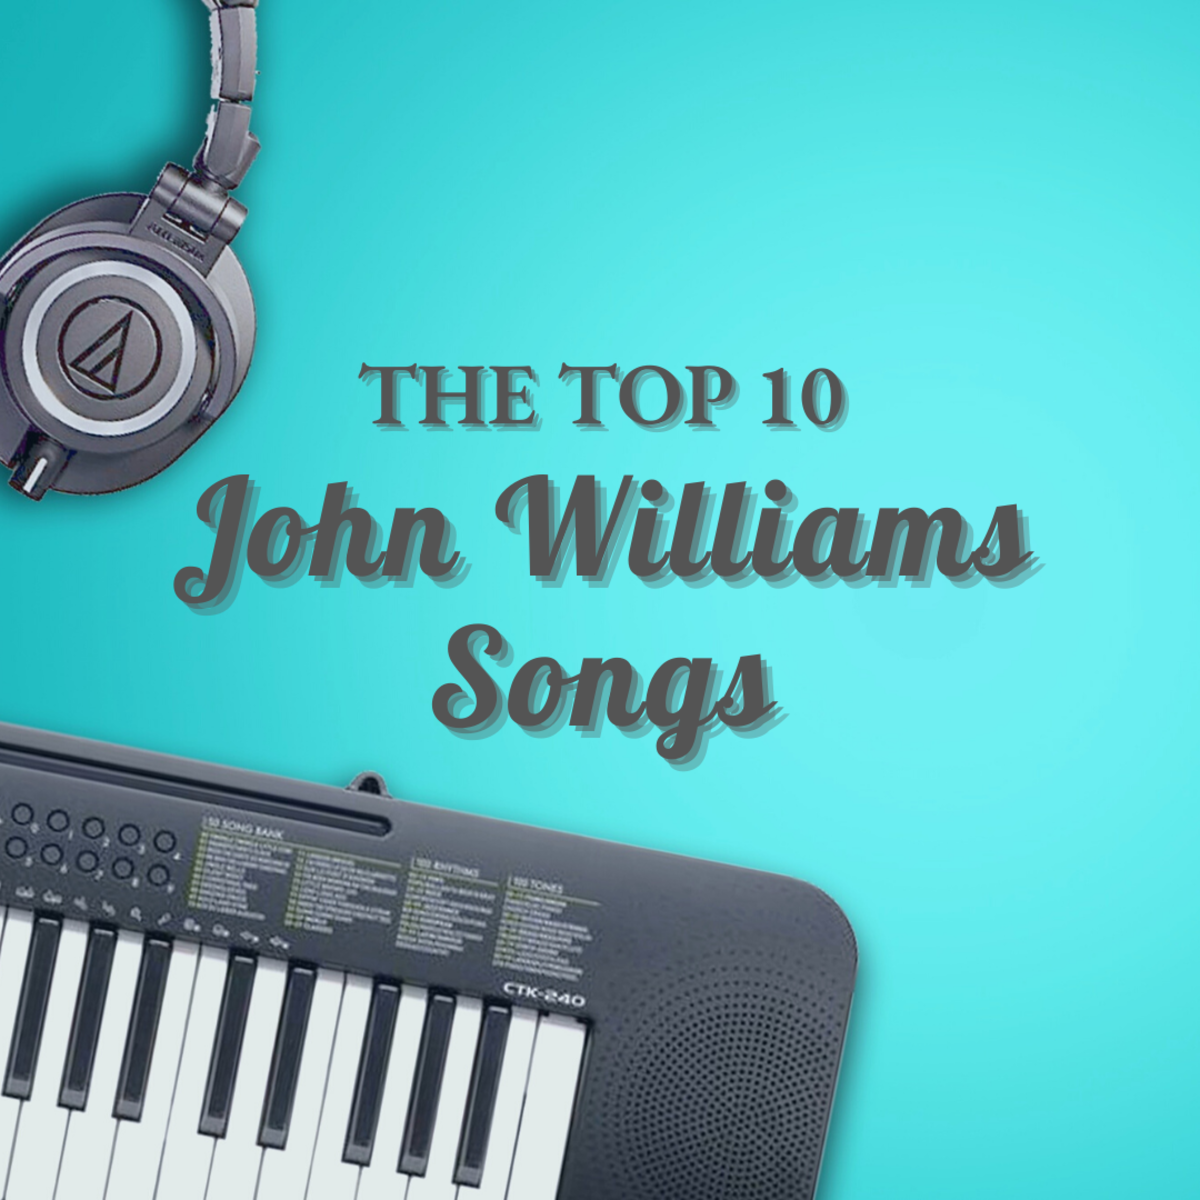 John Williams has an impressive and extensive discography—here is a list of his top 10 compositions. 